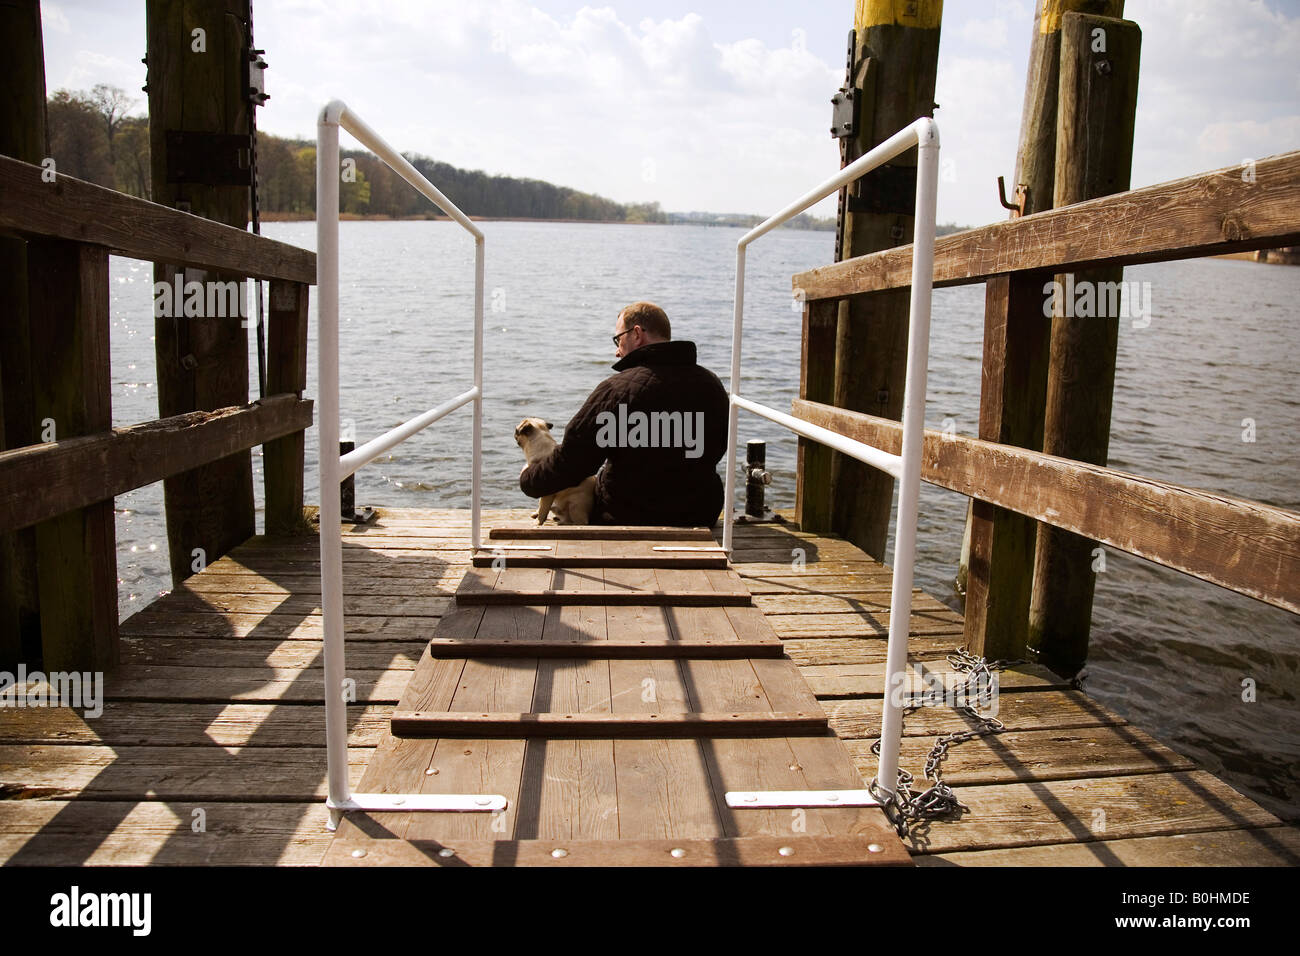 Man and a pug sitting on a wooden dock, looking around Stock Photo